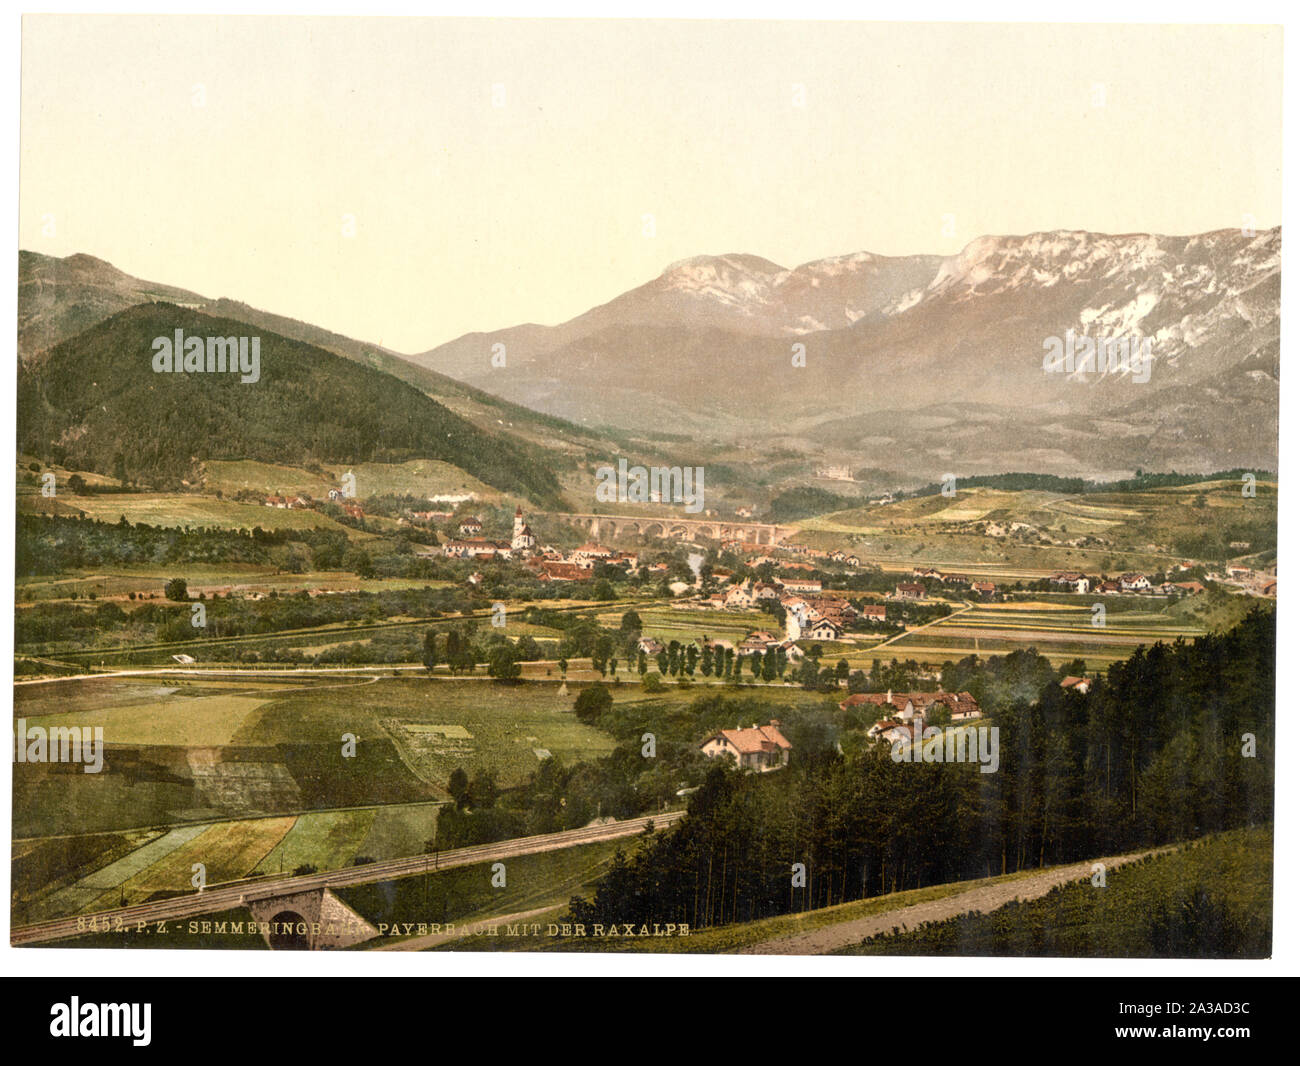 Semmering Railway, Payerbach with the Raxalpe, Styria, Austro-Hungary; Forms part of: Views of the Austro-Hungarian Empire in the Photochrom print collection.; Title devised by Library staff.; Print no. 8452.; Stock Photo